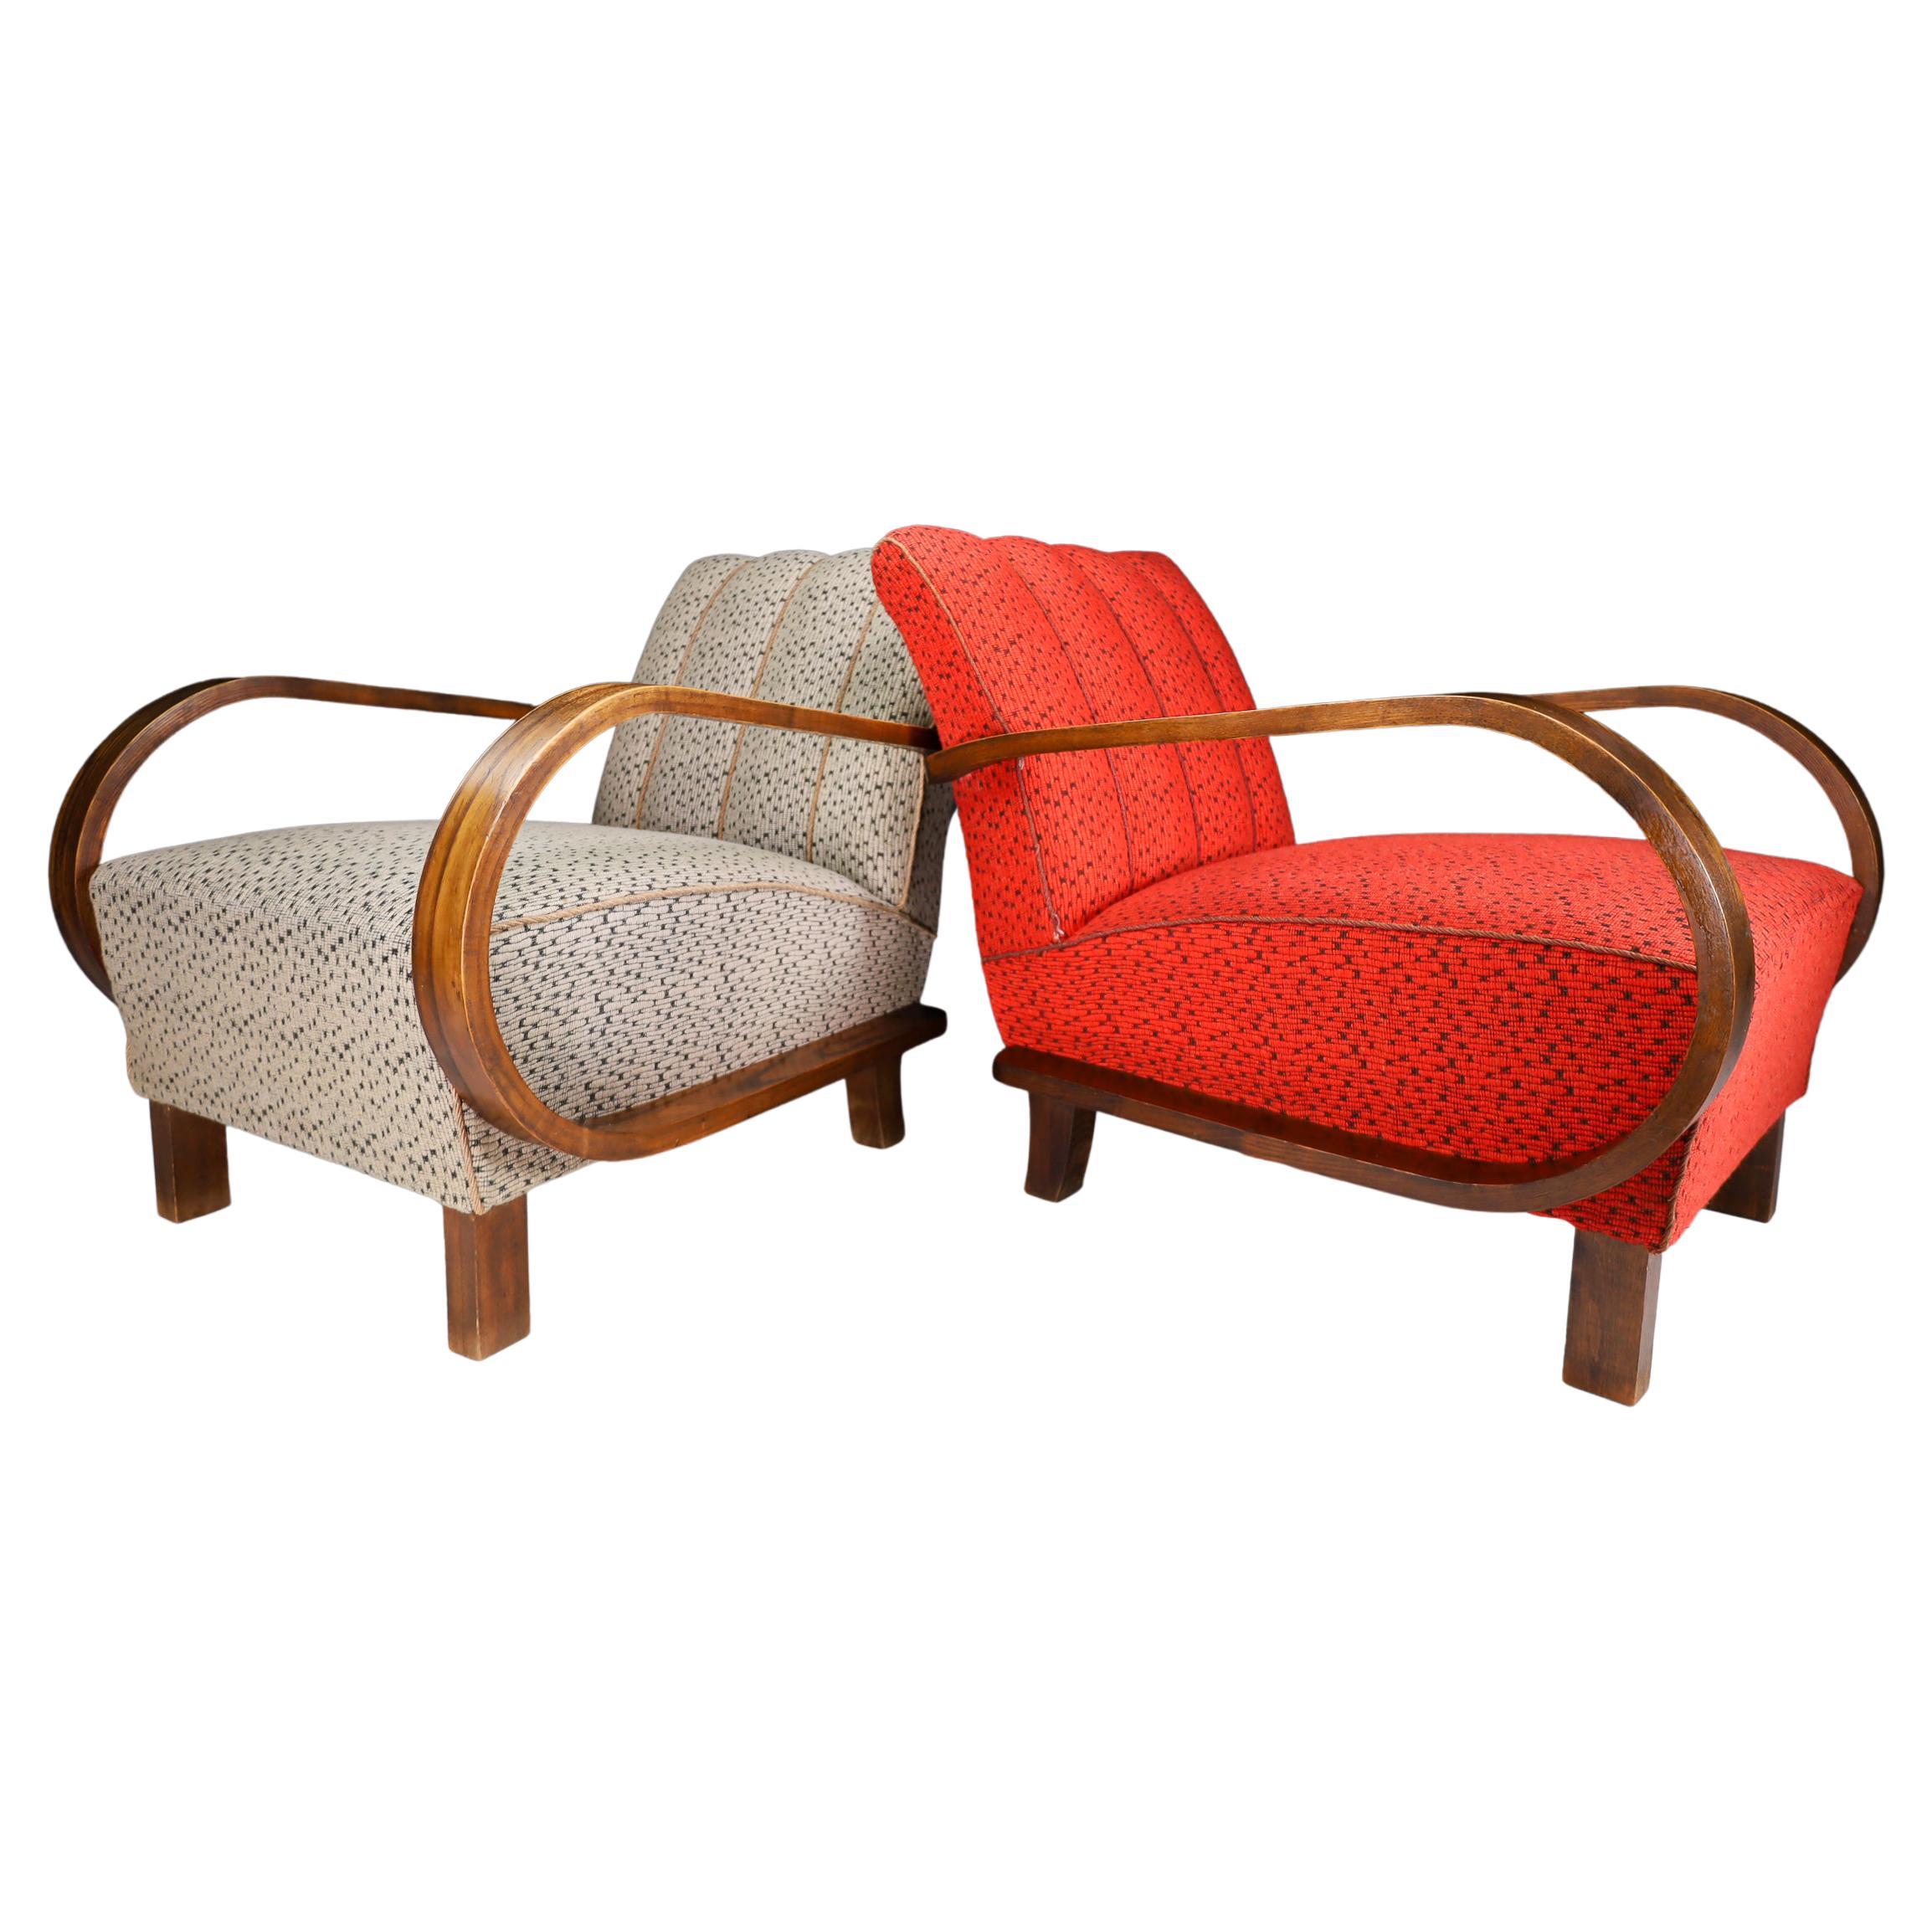 Art-Deco Armchairs in Bentwood and Original Fabric, Austria, 1930s For Sale